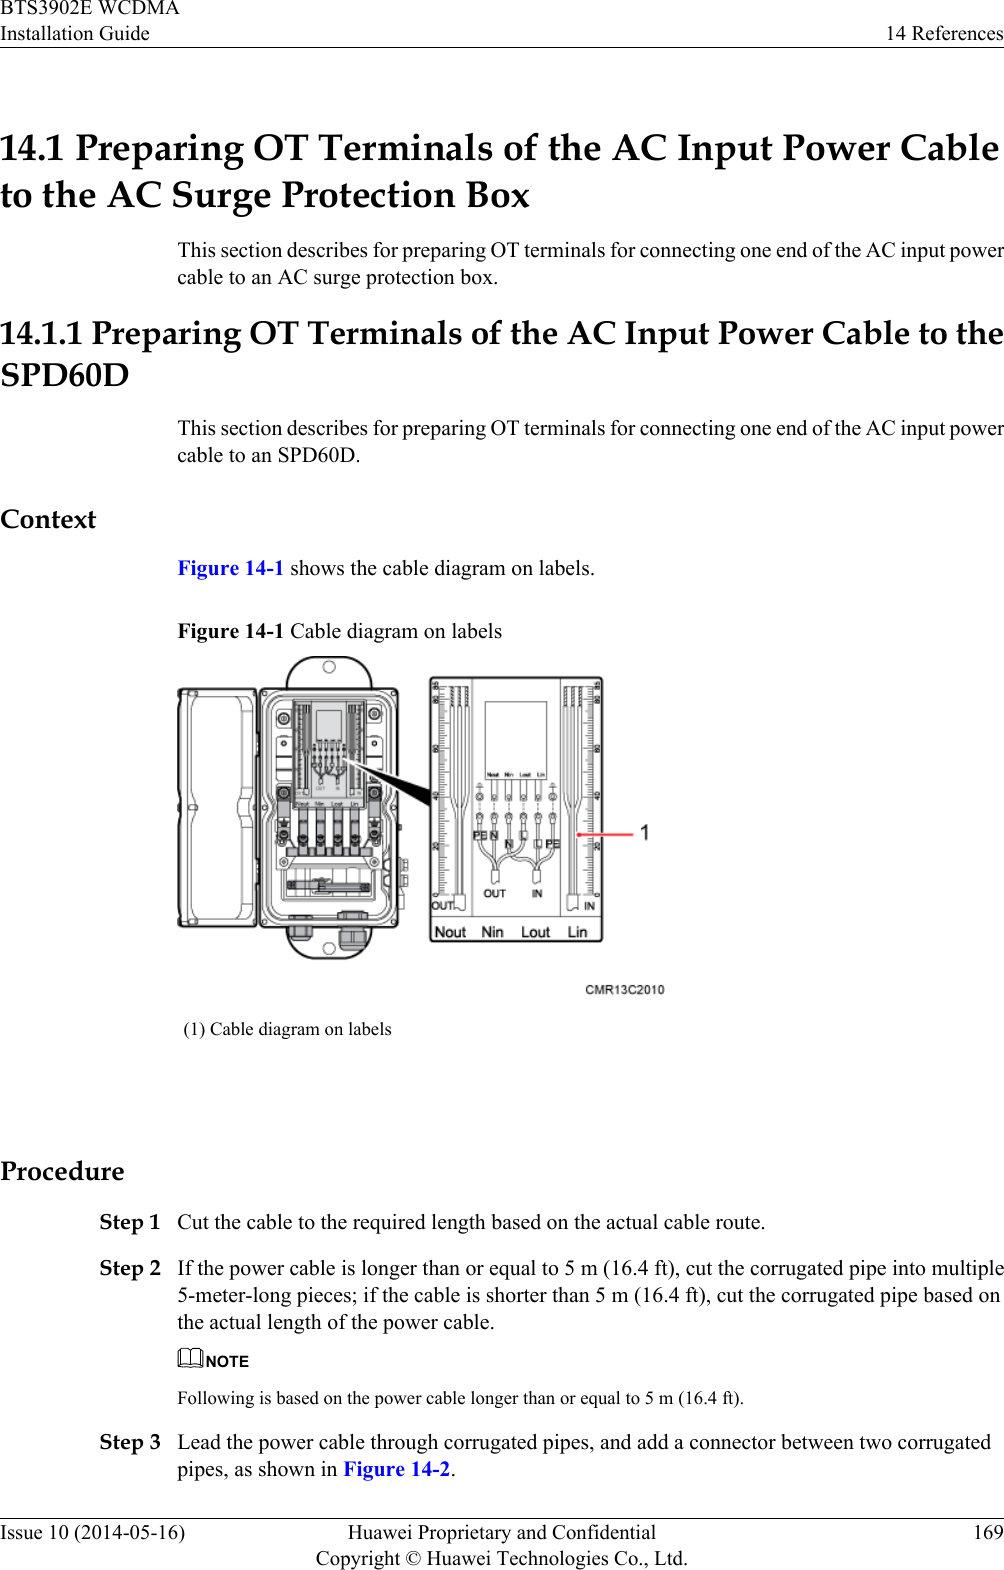 14.1 Preparing OT Terminals of the AC Input Power Cableto the AC Surge Protection BoxThis section describes for preparing OT terminals for connecting one end of the AC input powercable to an AC surge protection box.14.1.1 Preparing OT Terminals of the AC Input Power Cable to theSPD60DThis section describes for preparing OT terminals for connecting one end of the AC input powercable to an SPD60D.ContextFigure 14-1 shows the cable diagram on labels.Figure 14-1 Cable diagram on labels(1) Cable diagram on labels ProcedureStep 1 Cut the cable to the required length based on the actual cable route.Step 2 If the power cable is longer than or equal to 5 m (16.4 ft), cut the corrugated pipe into multiple5-meter-long pieces; if the cable is shorter than 5 m (16.4 ft), cut the corrugated pipe based onthe actual length of the power cable.NOTEFollowing is based on the power cable longer than or equal to 5 m (16.4 ft).Step 3 Lead the power cable through corrugated pipes, and add a connector between two corrugatedpipes, as shown in Figure 14-2.BTS3902E WCDMAInstallation Guide 14 ReferencesIssue 10 (2014-05-16) Huawei Proprietary and ConfidentialCopyright © Huawei Technologies Co., Ltd.169